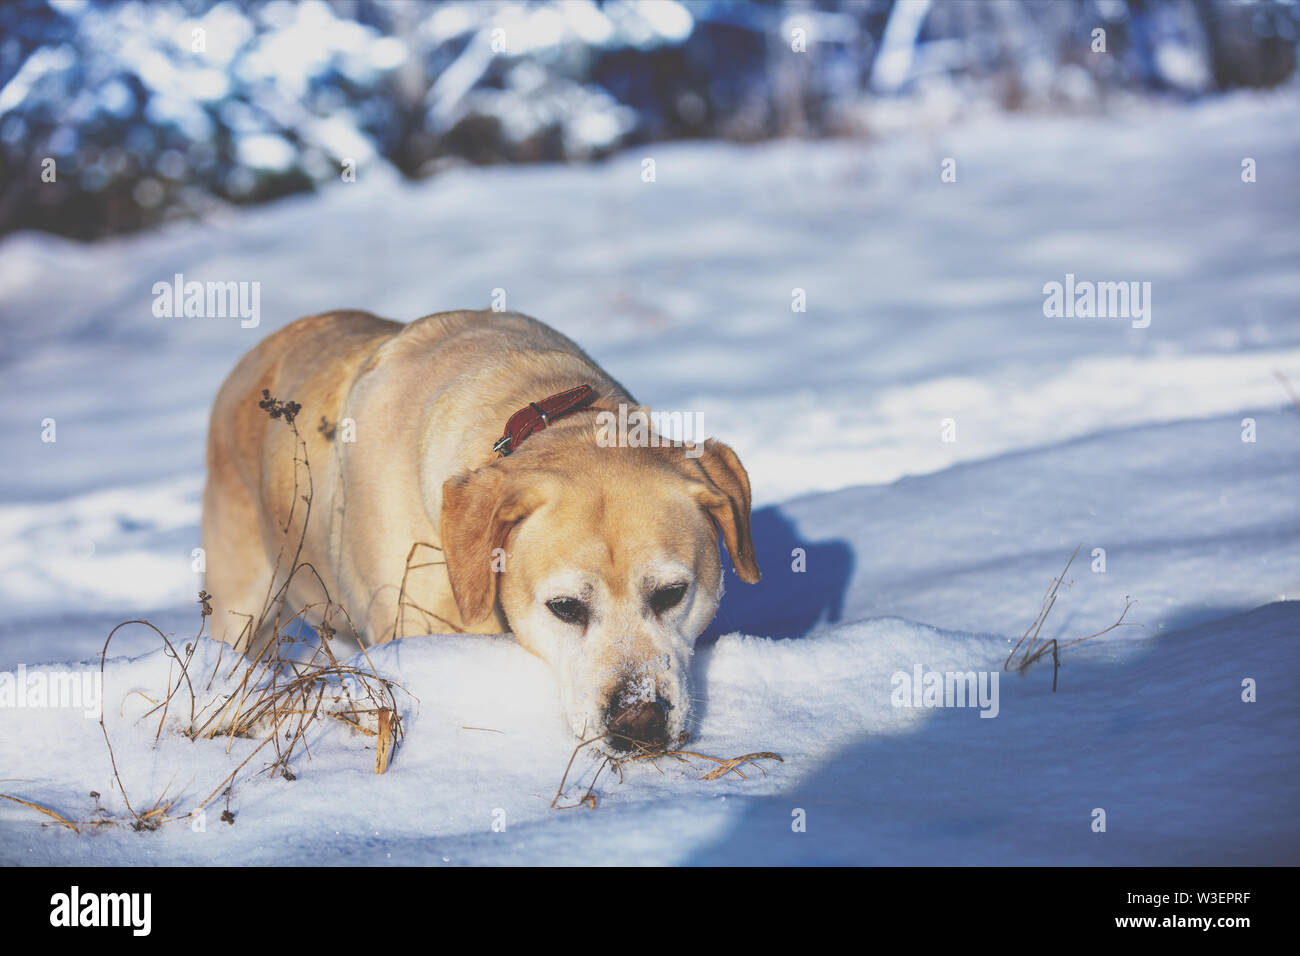 Labrador retriever dog hunting outdoors in winter snowy forest Stock Photo